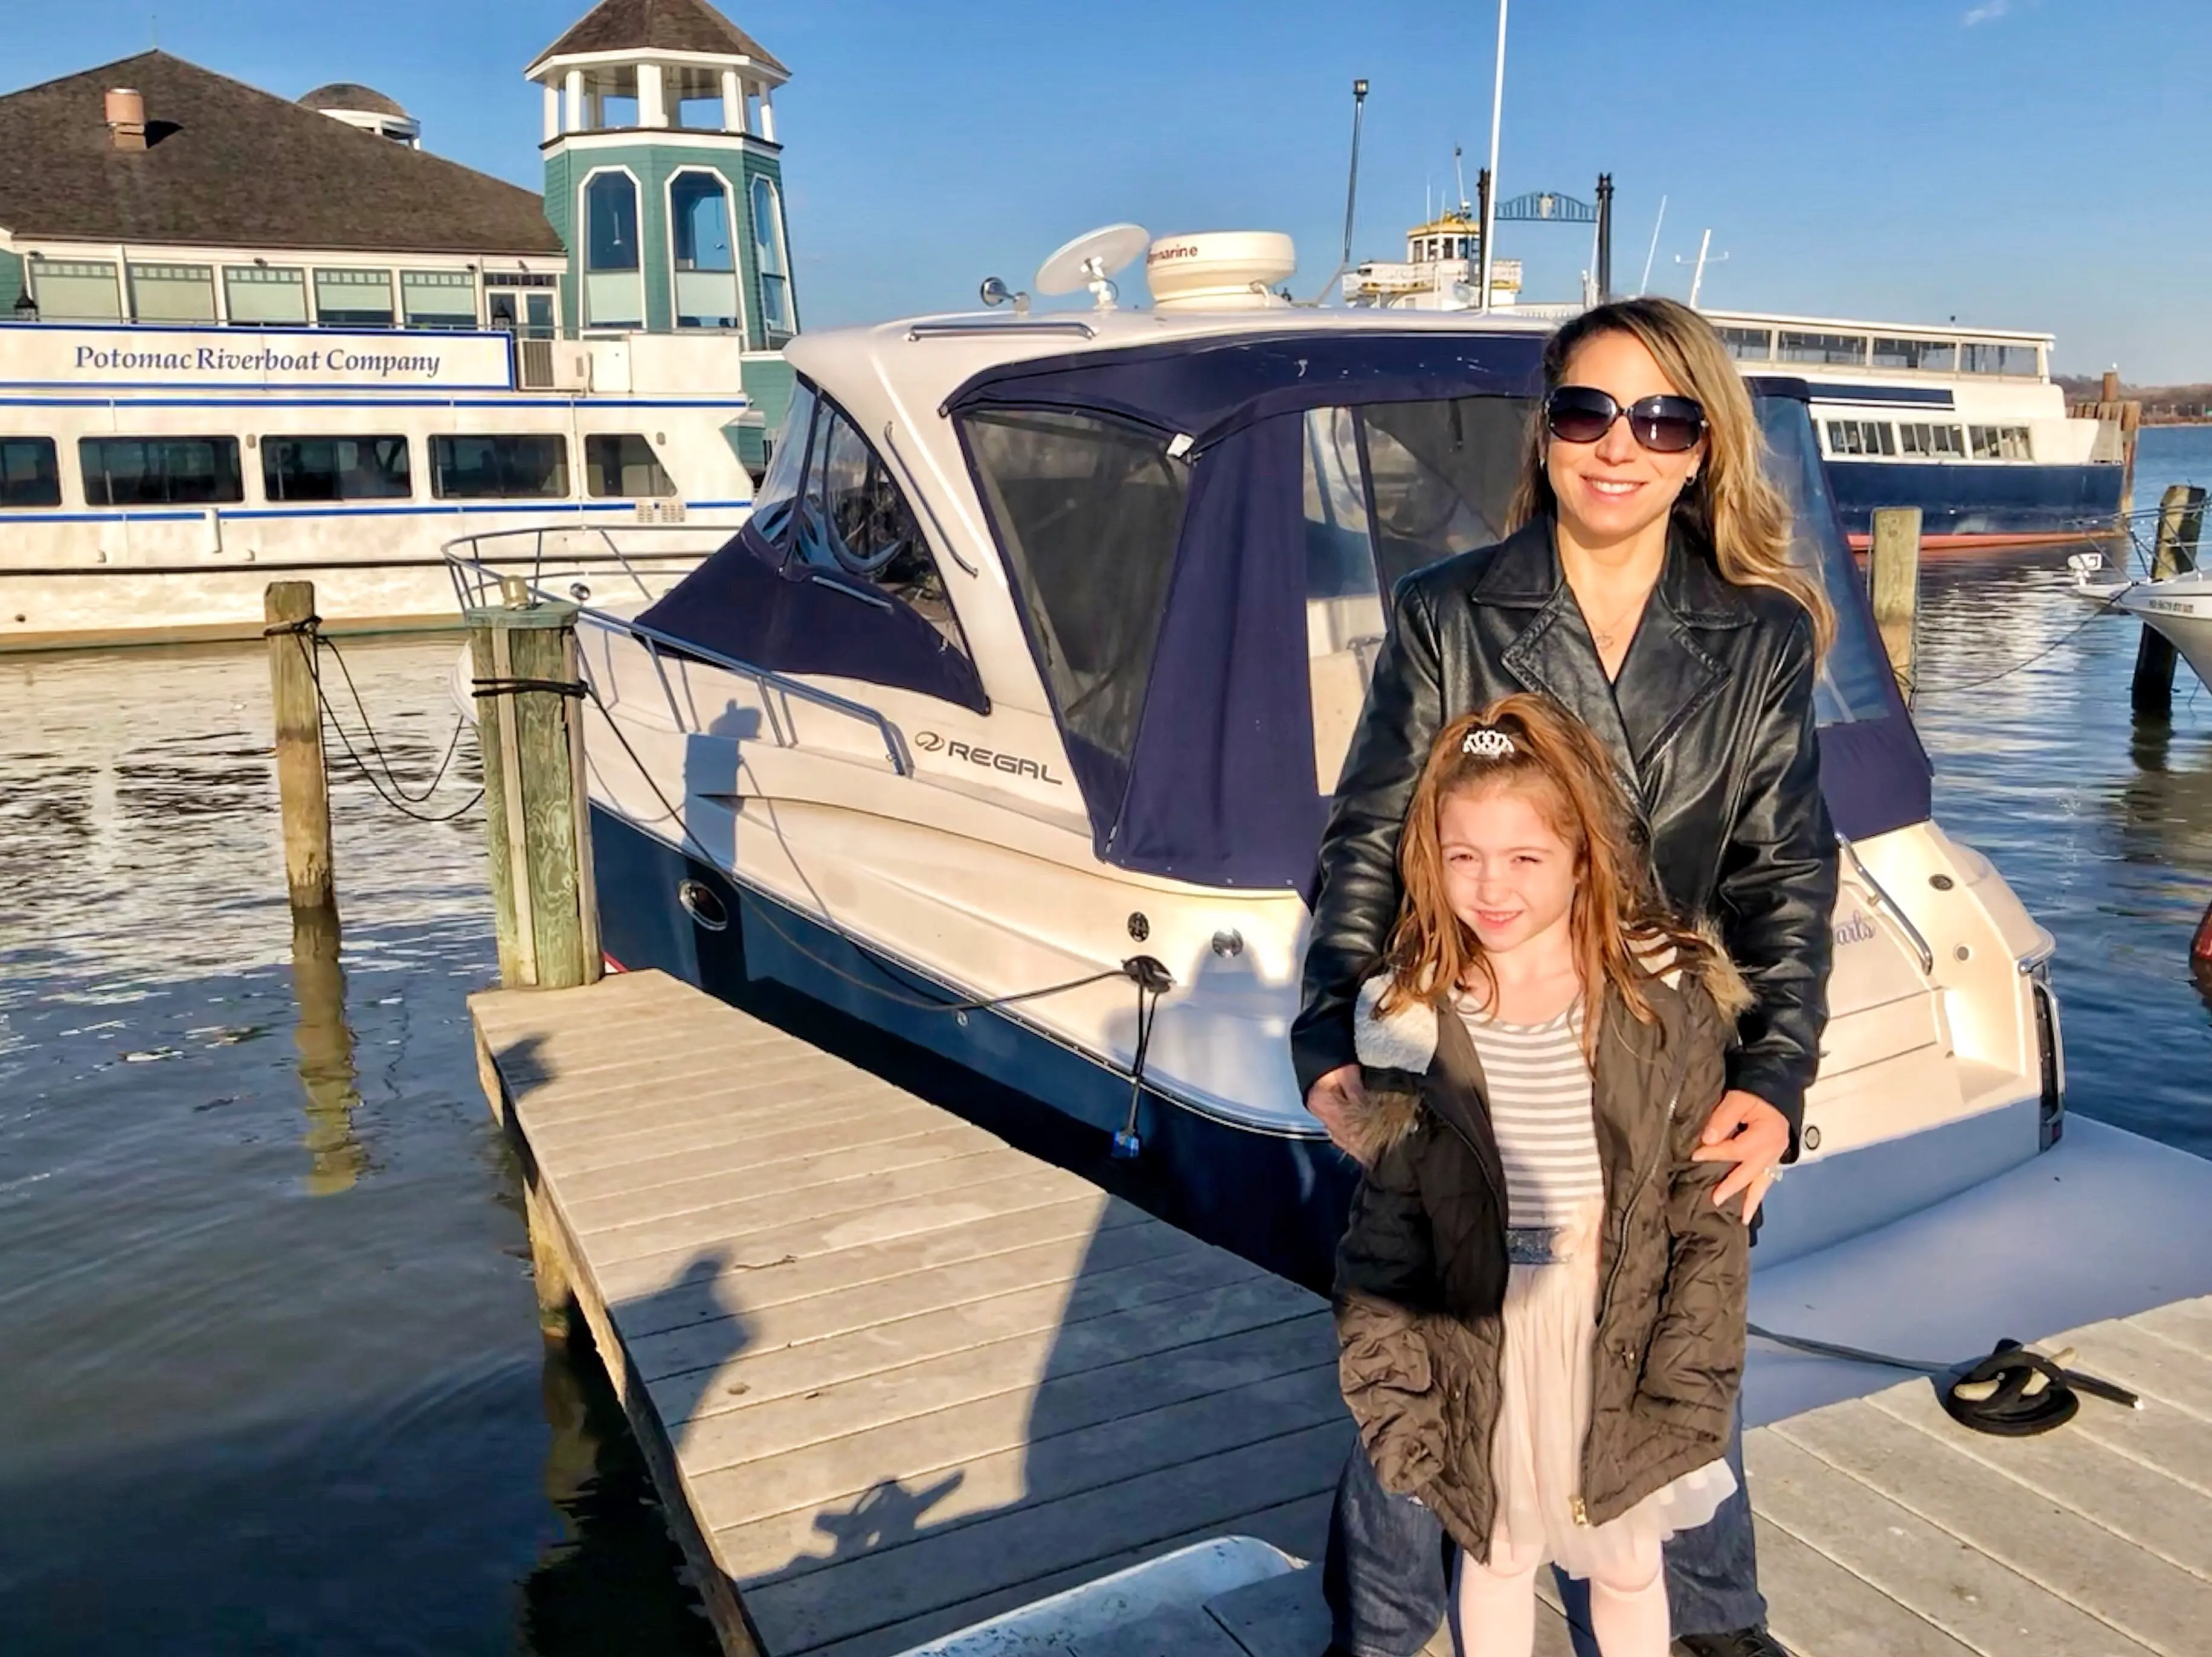 Old Town Alexandria, Virginia makes a great place for a mother and daughter fun day or weekend. There is tons to do from spa experiences, art exhibits, shopping, sightseeing cruises, historic museums, and more. #AlexandriaVA #girlstrip